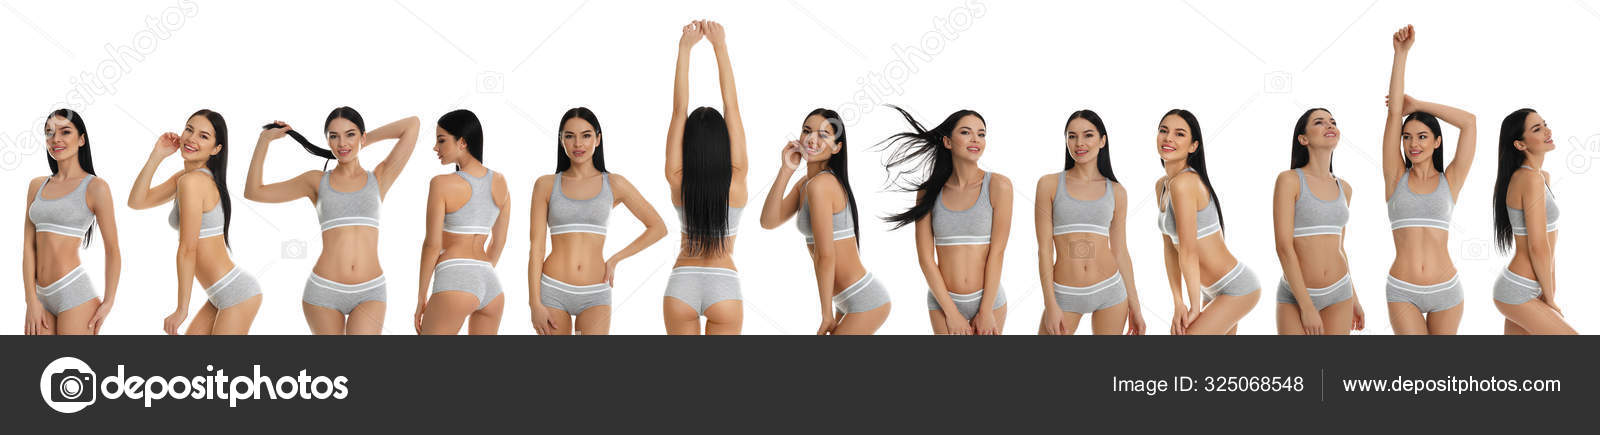 Collage Beautiful Young Woman Grey Sportive Underwear Isolated White Banner  Stock Photo by ©NewAfrica 325068548